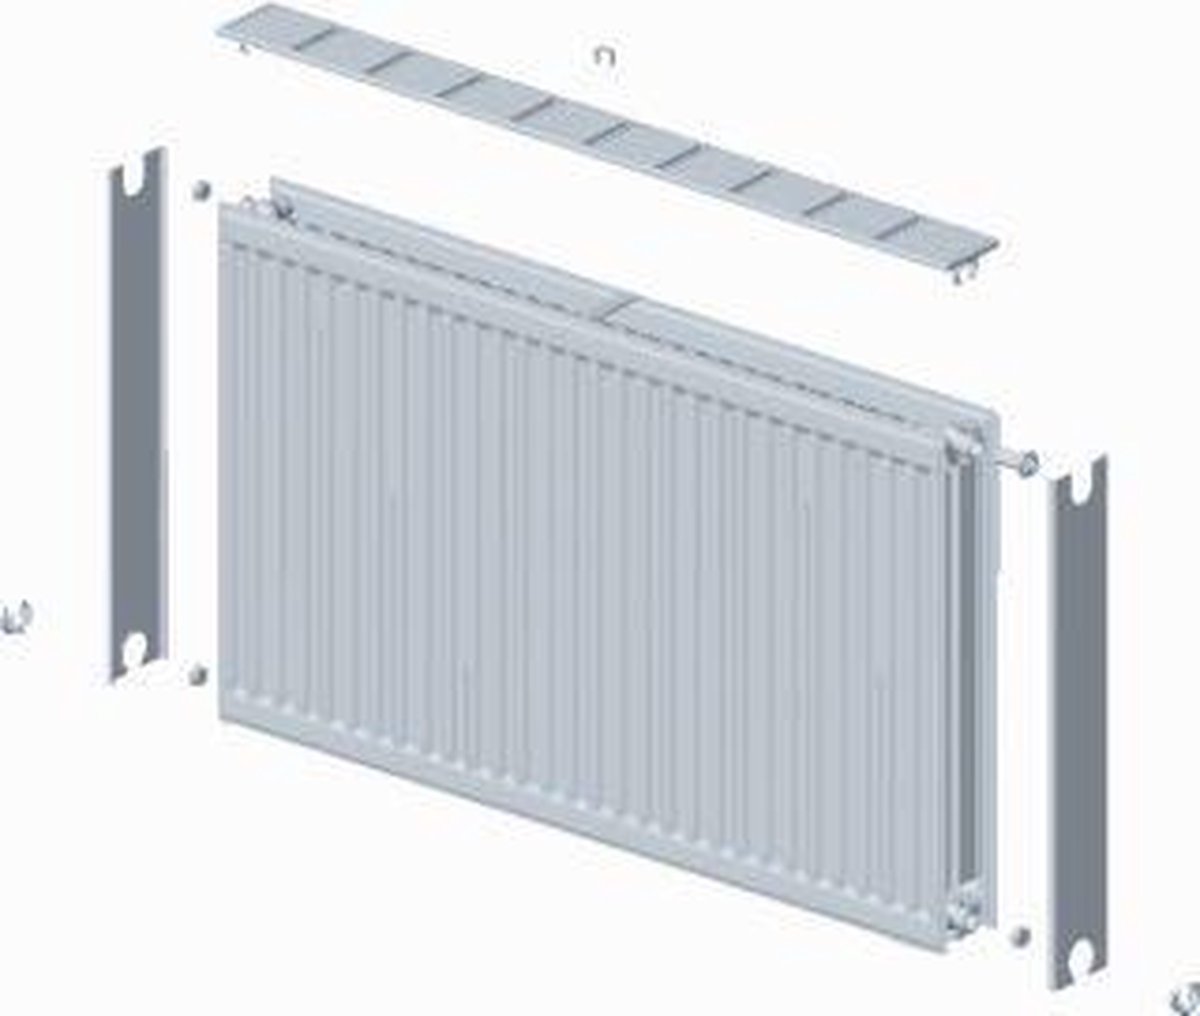 Stelrad paneelradiator Novello, staal, wit, (hxlxd) 500x600x100mm, 22